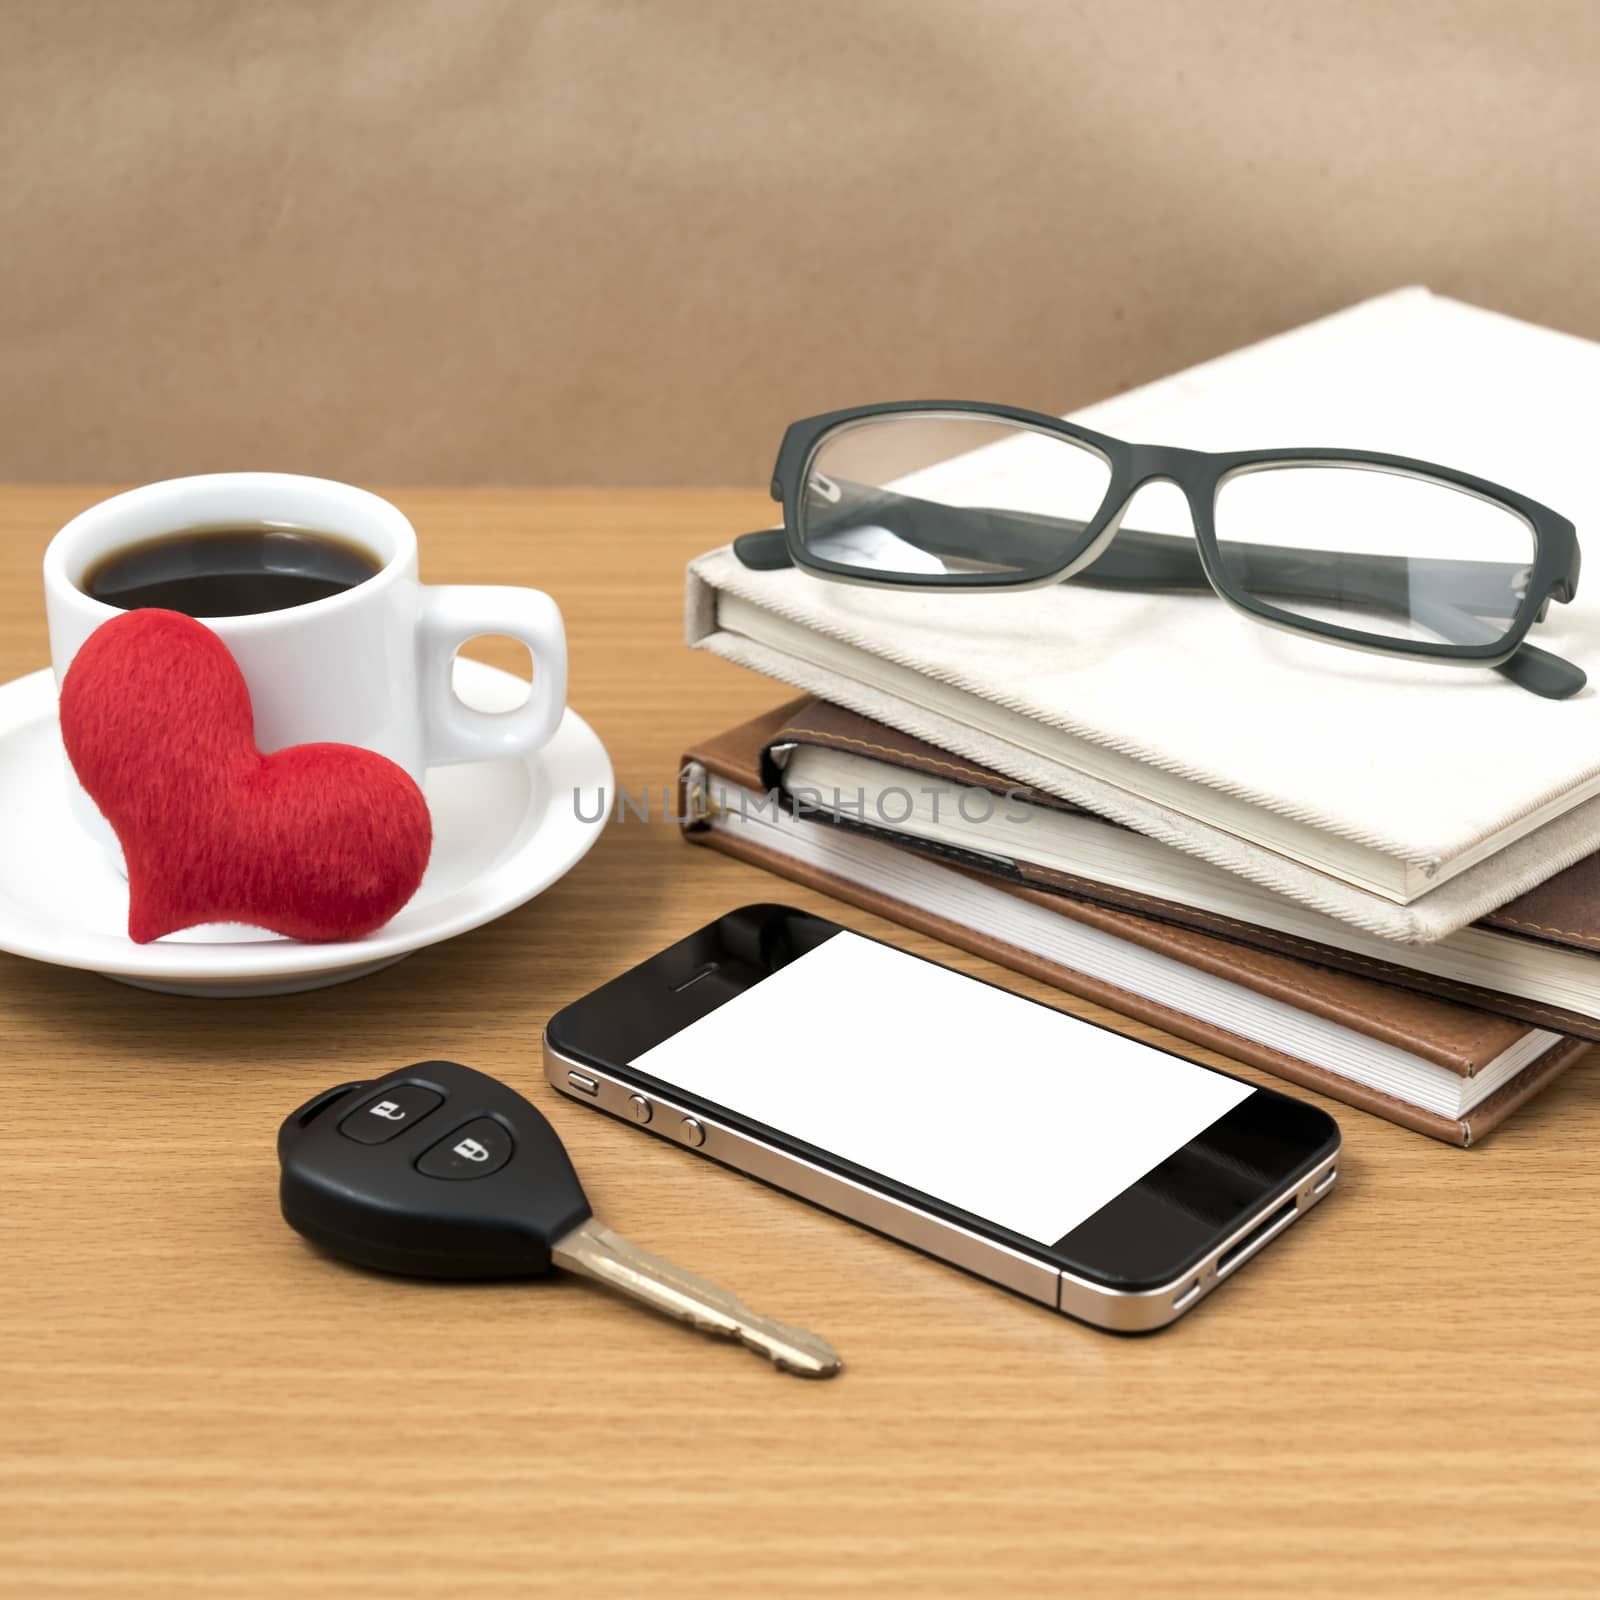 office desk : coffee and phone with car key,eyeglasses,stack of book,heart